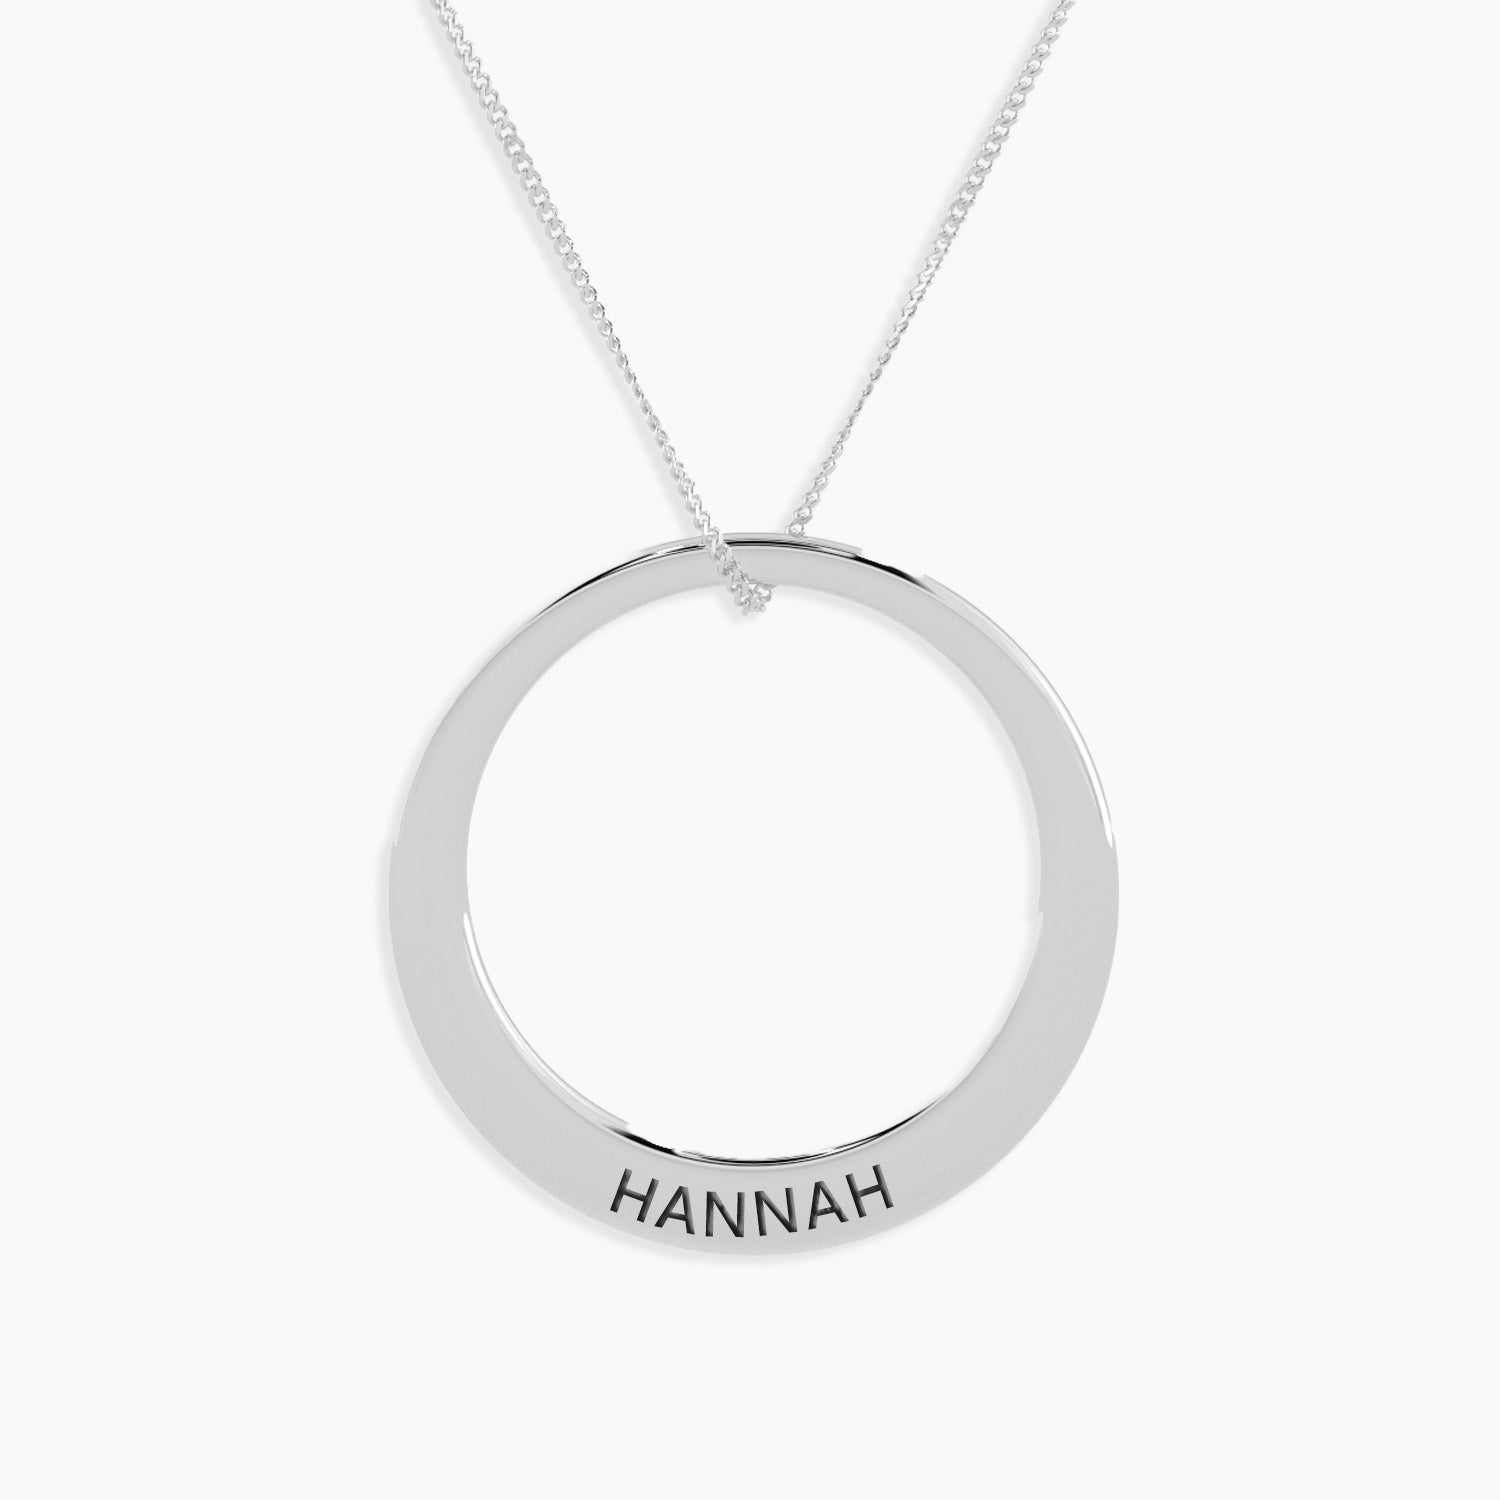 front view of grand custom pendant with name hannah